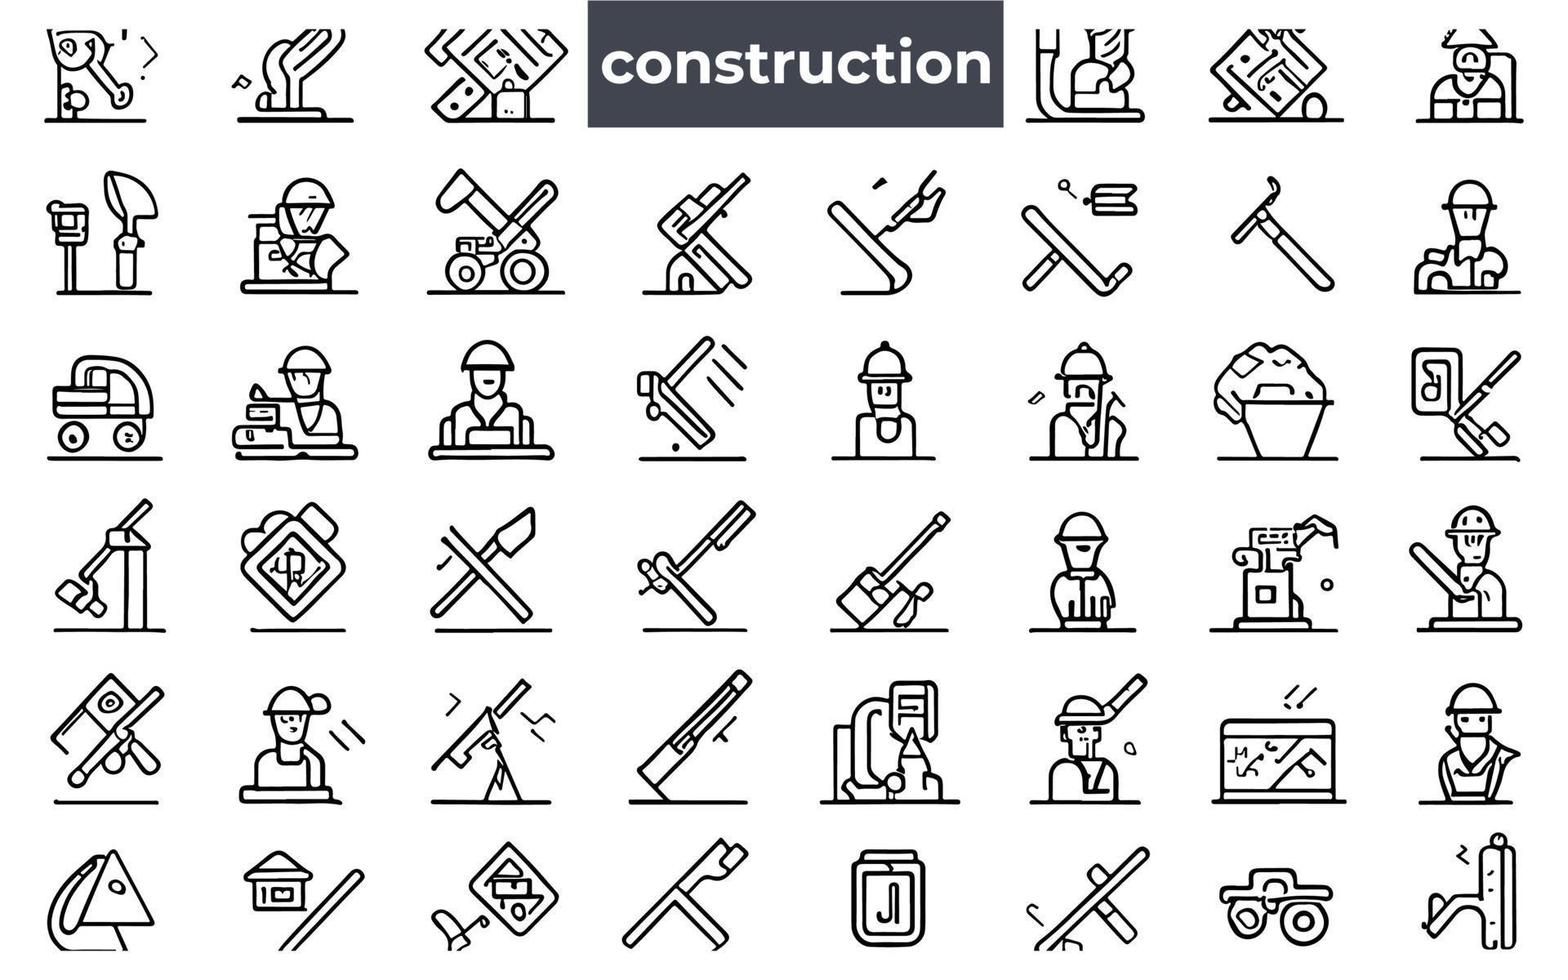 Construction icons set. Simple collection of Construction Related Vector Line Icons.. Tools, House icons, Builder,Vector